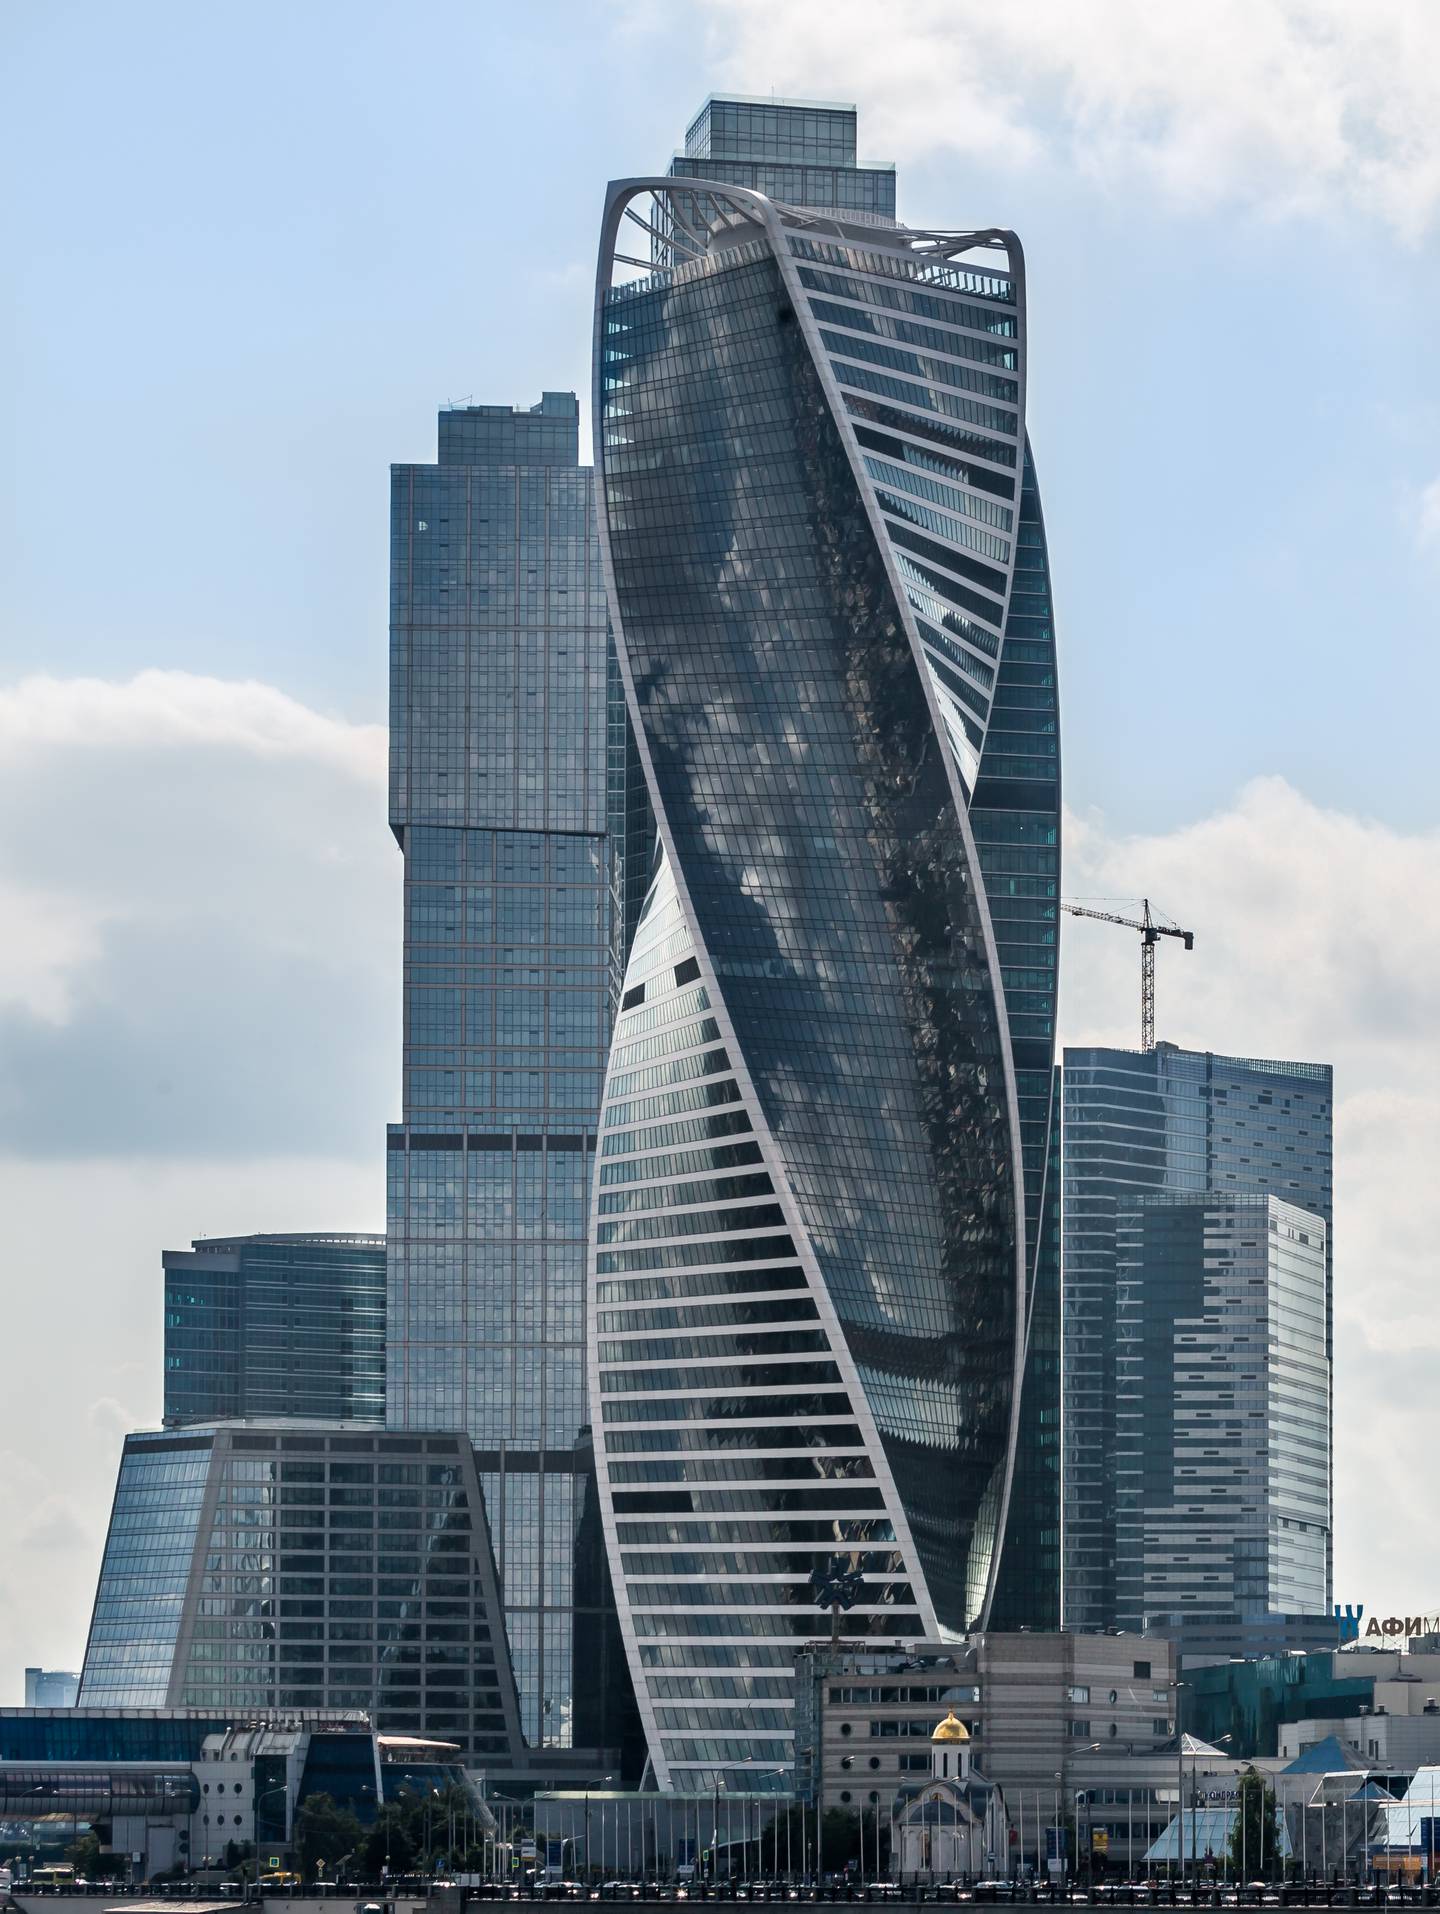 The 55-storey Evolution Tower in Moscow has a swirling structure. Photo: Wikipedia